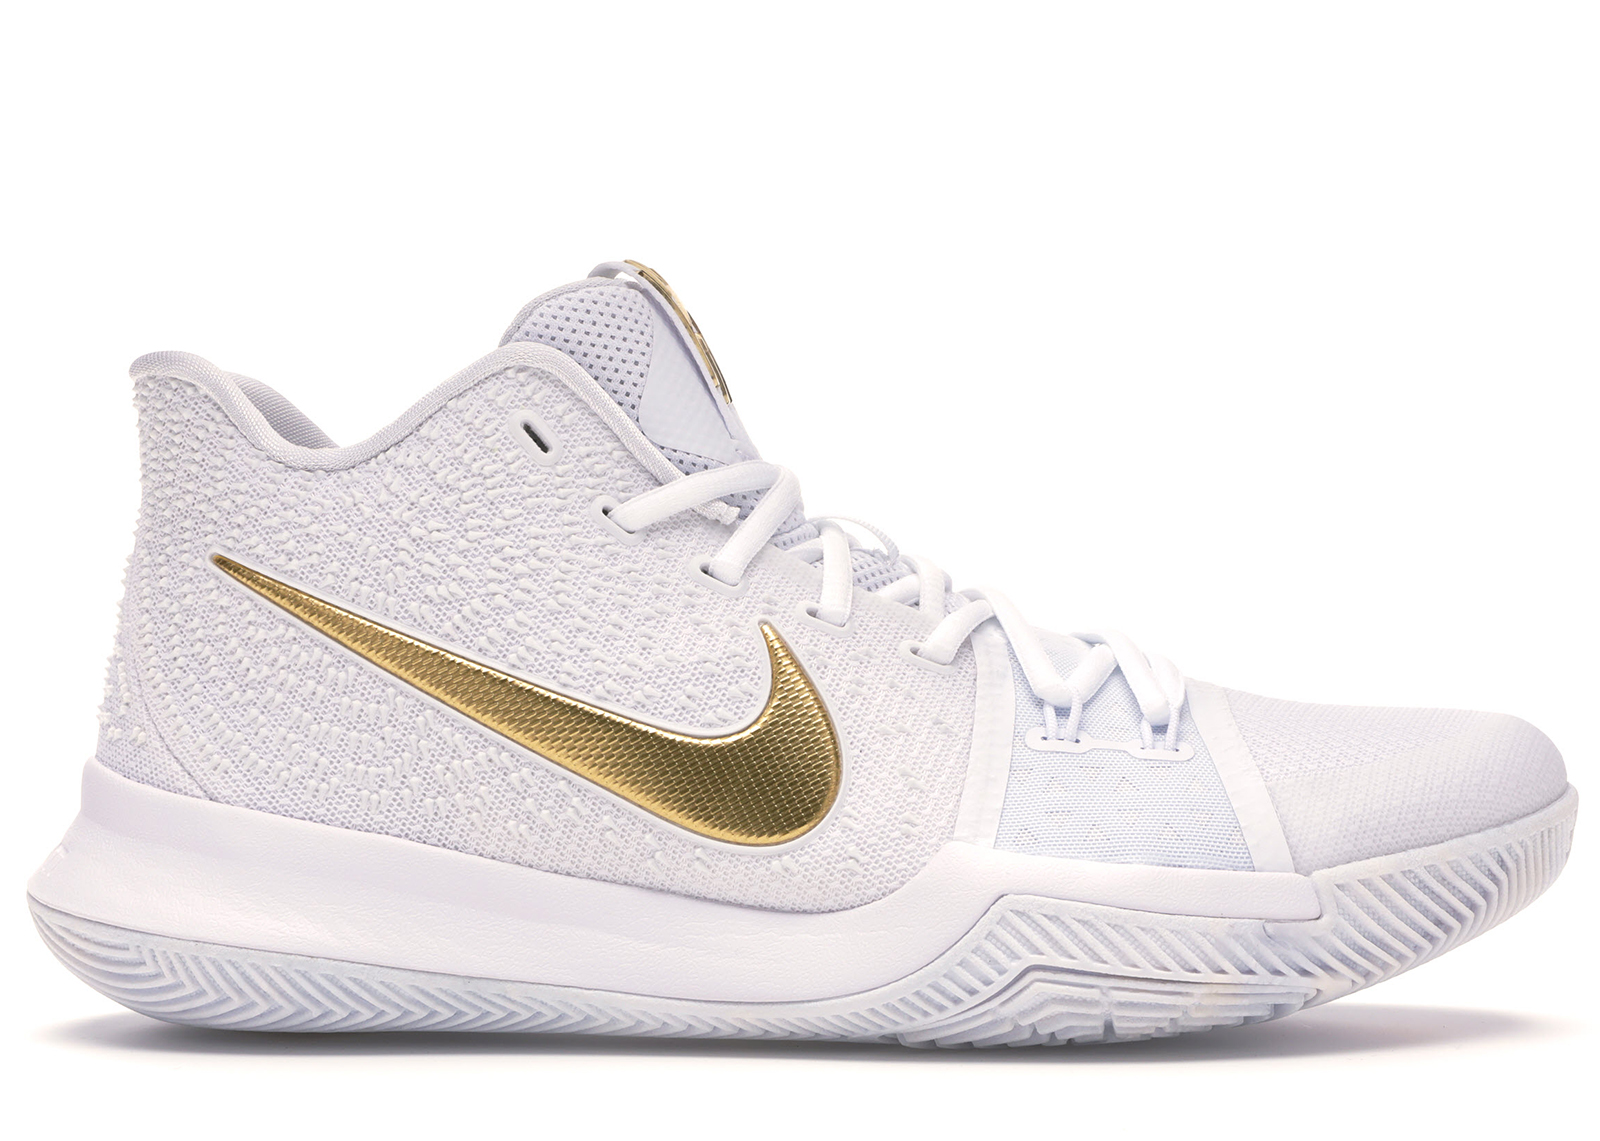 kyrie 3 white and yellow